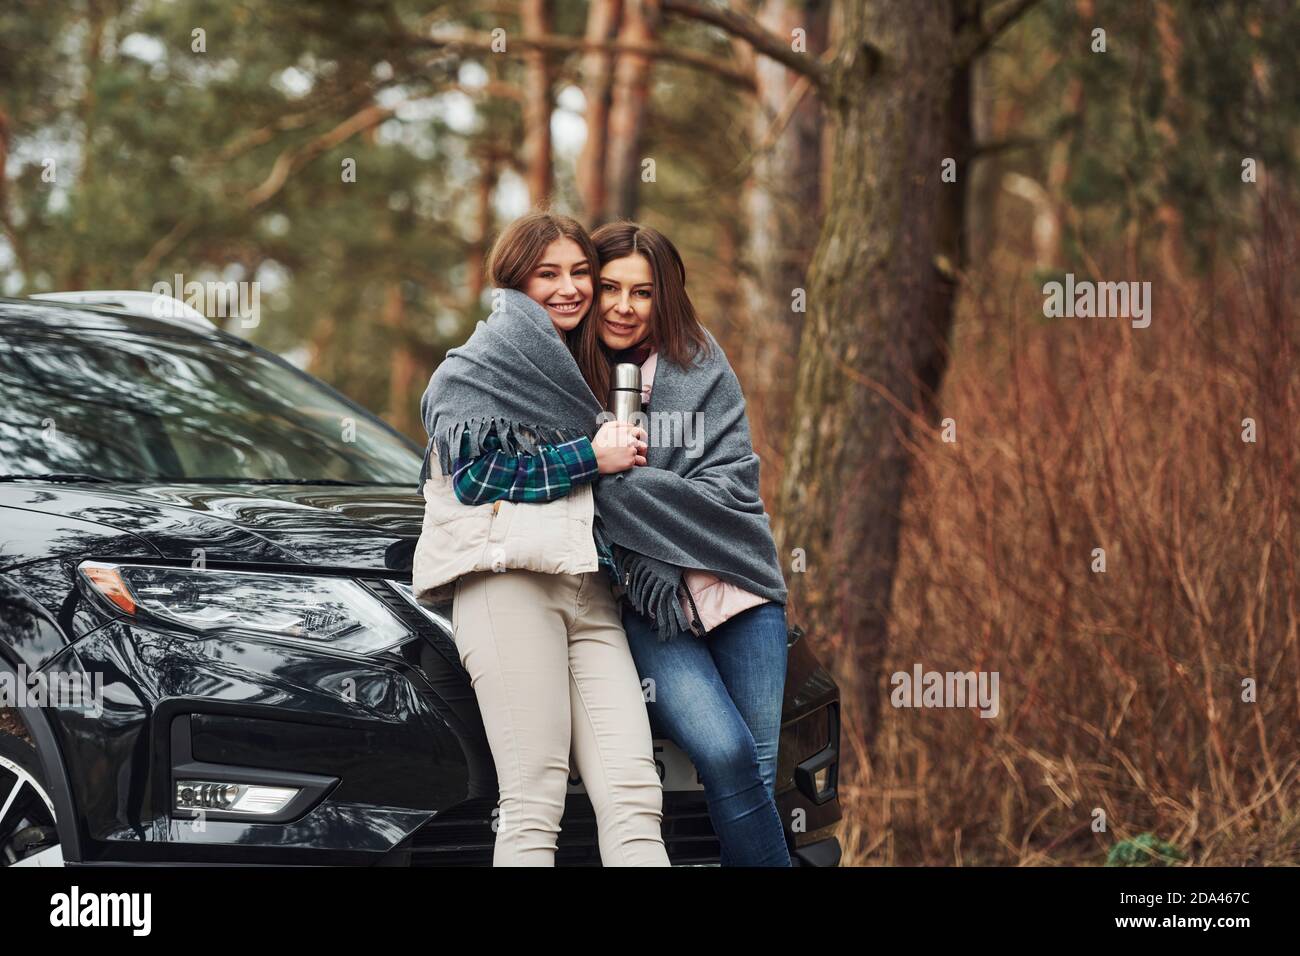 Mother and daughter standing together near modern black car outdoors in the forest Stock Photo